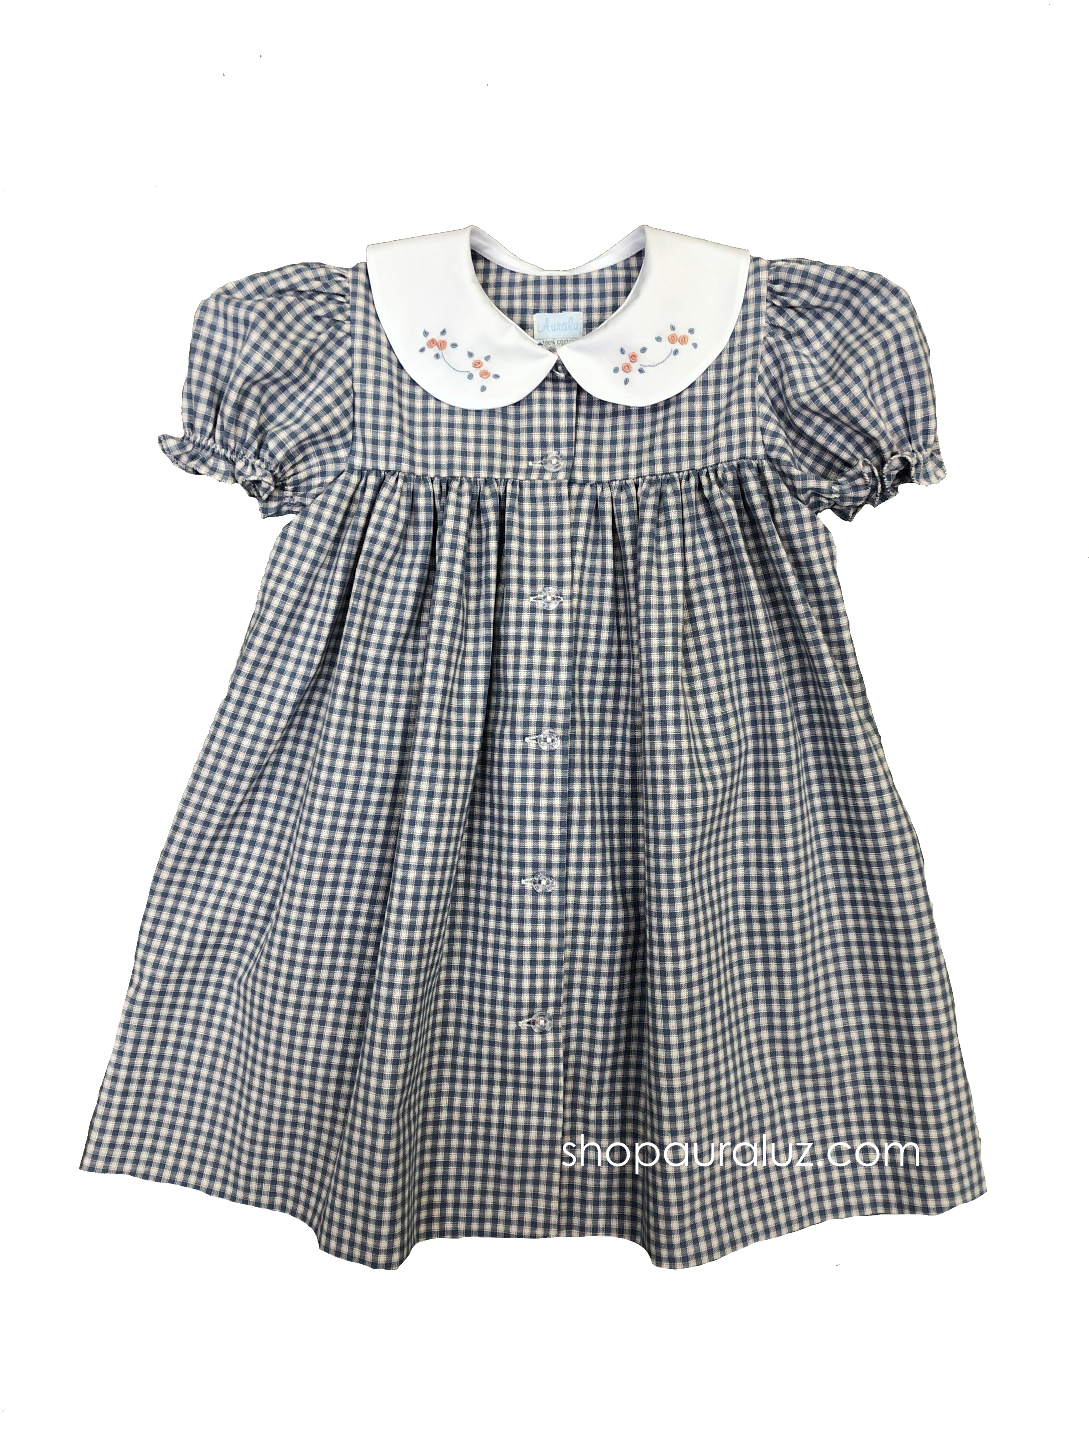 Auraluz Dress...Plaid with white p.p.collar and embroidered flowers